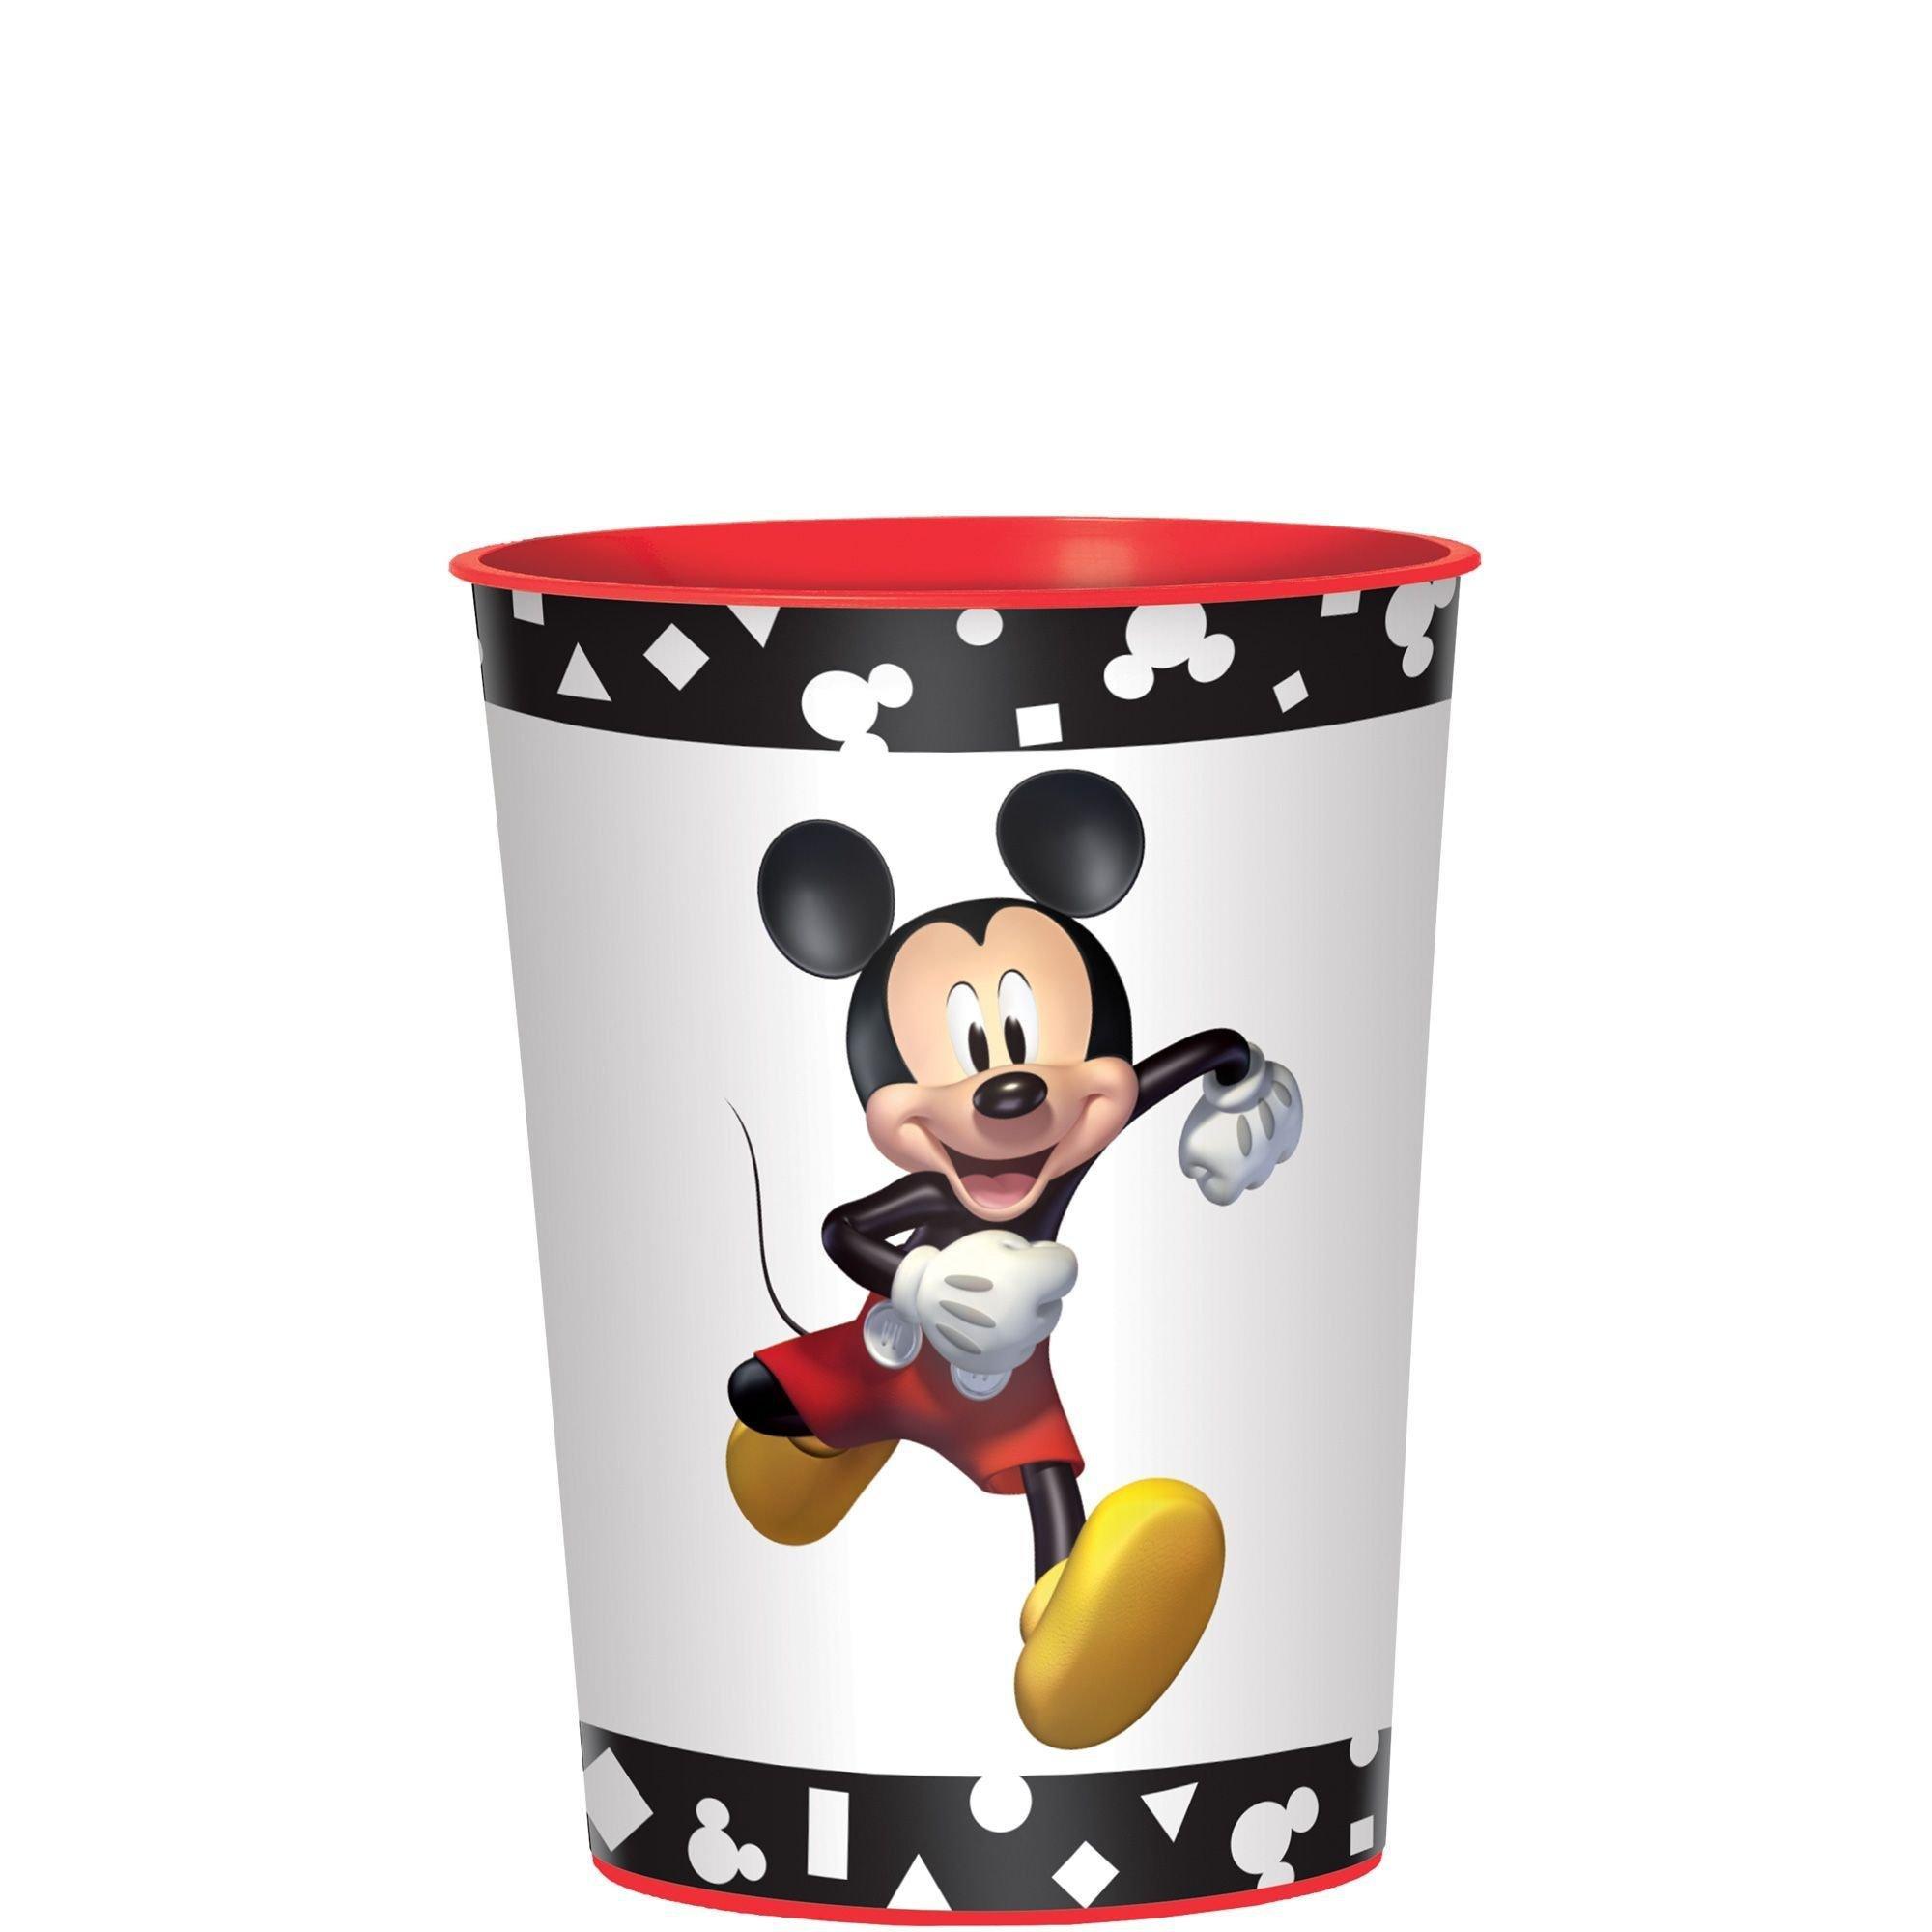 Party City Mickey Mouse Forever Kids Birthday Party Supplies for 8 Guests,  Plates, Napkins, Cups, Utensils, Decorations 